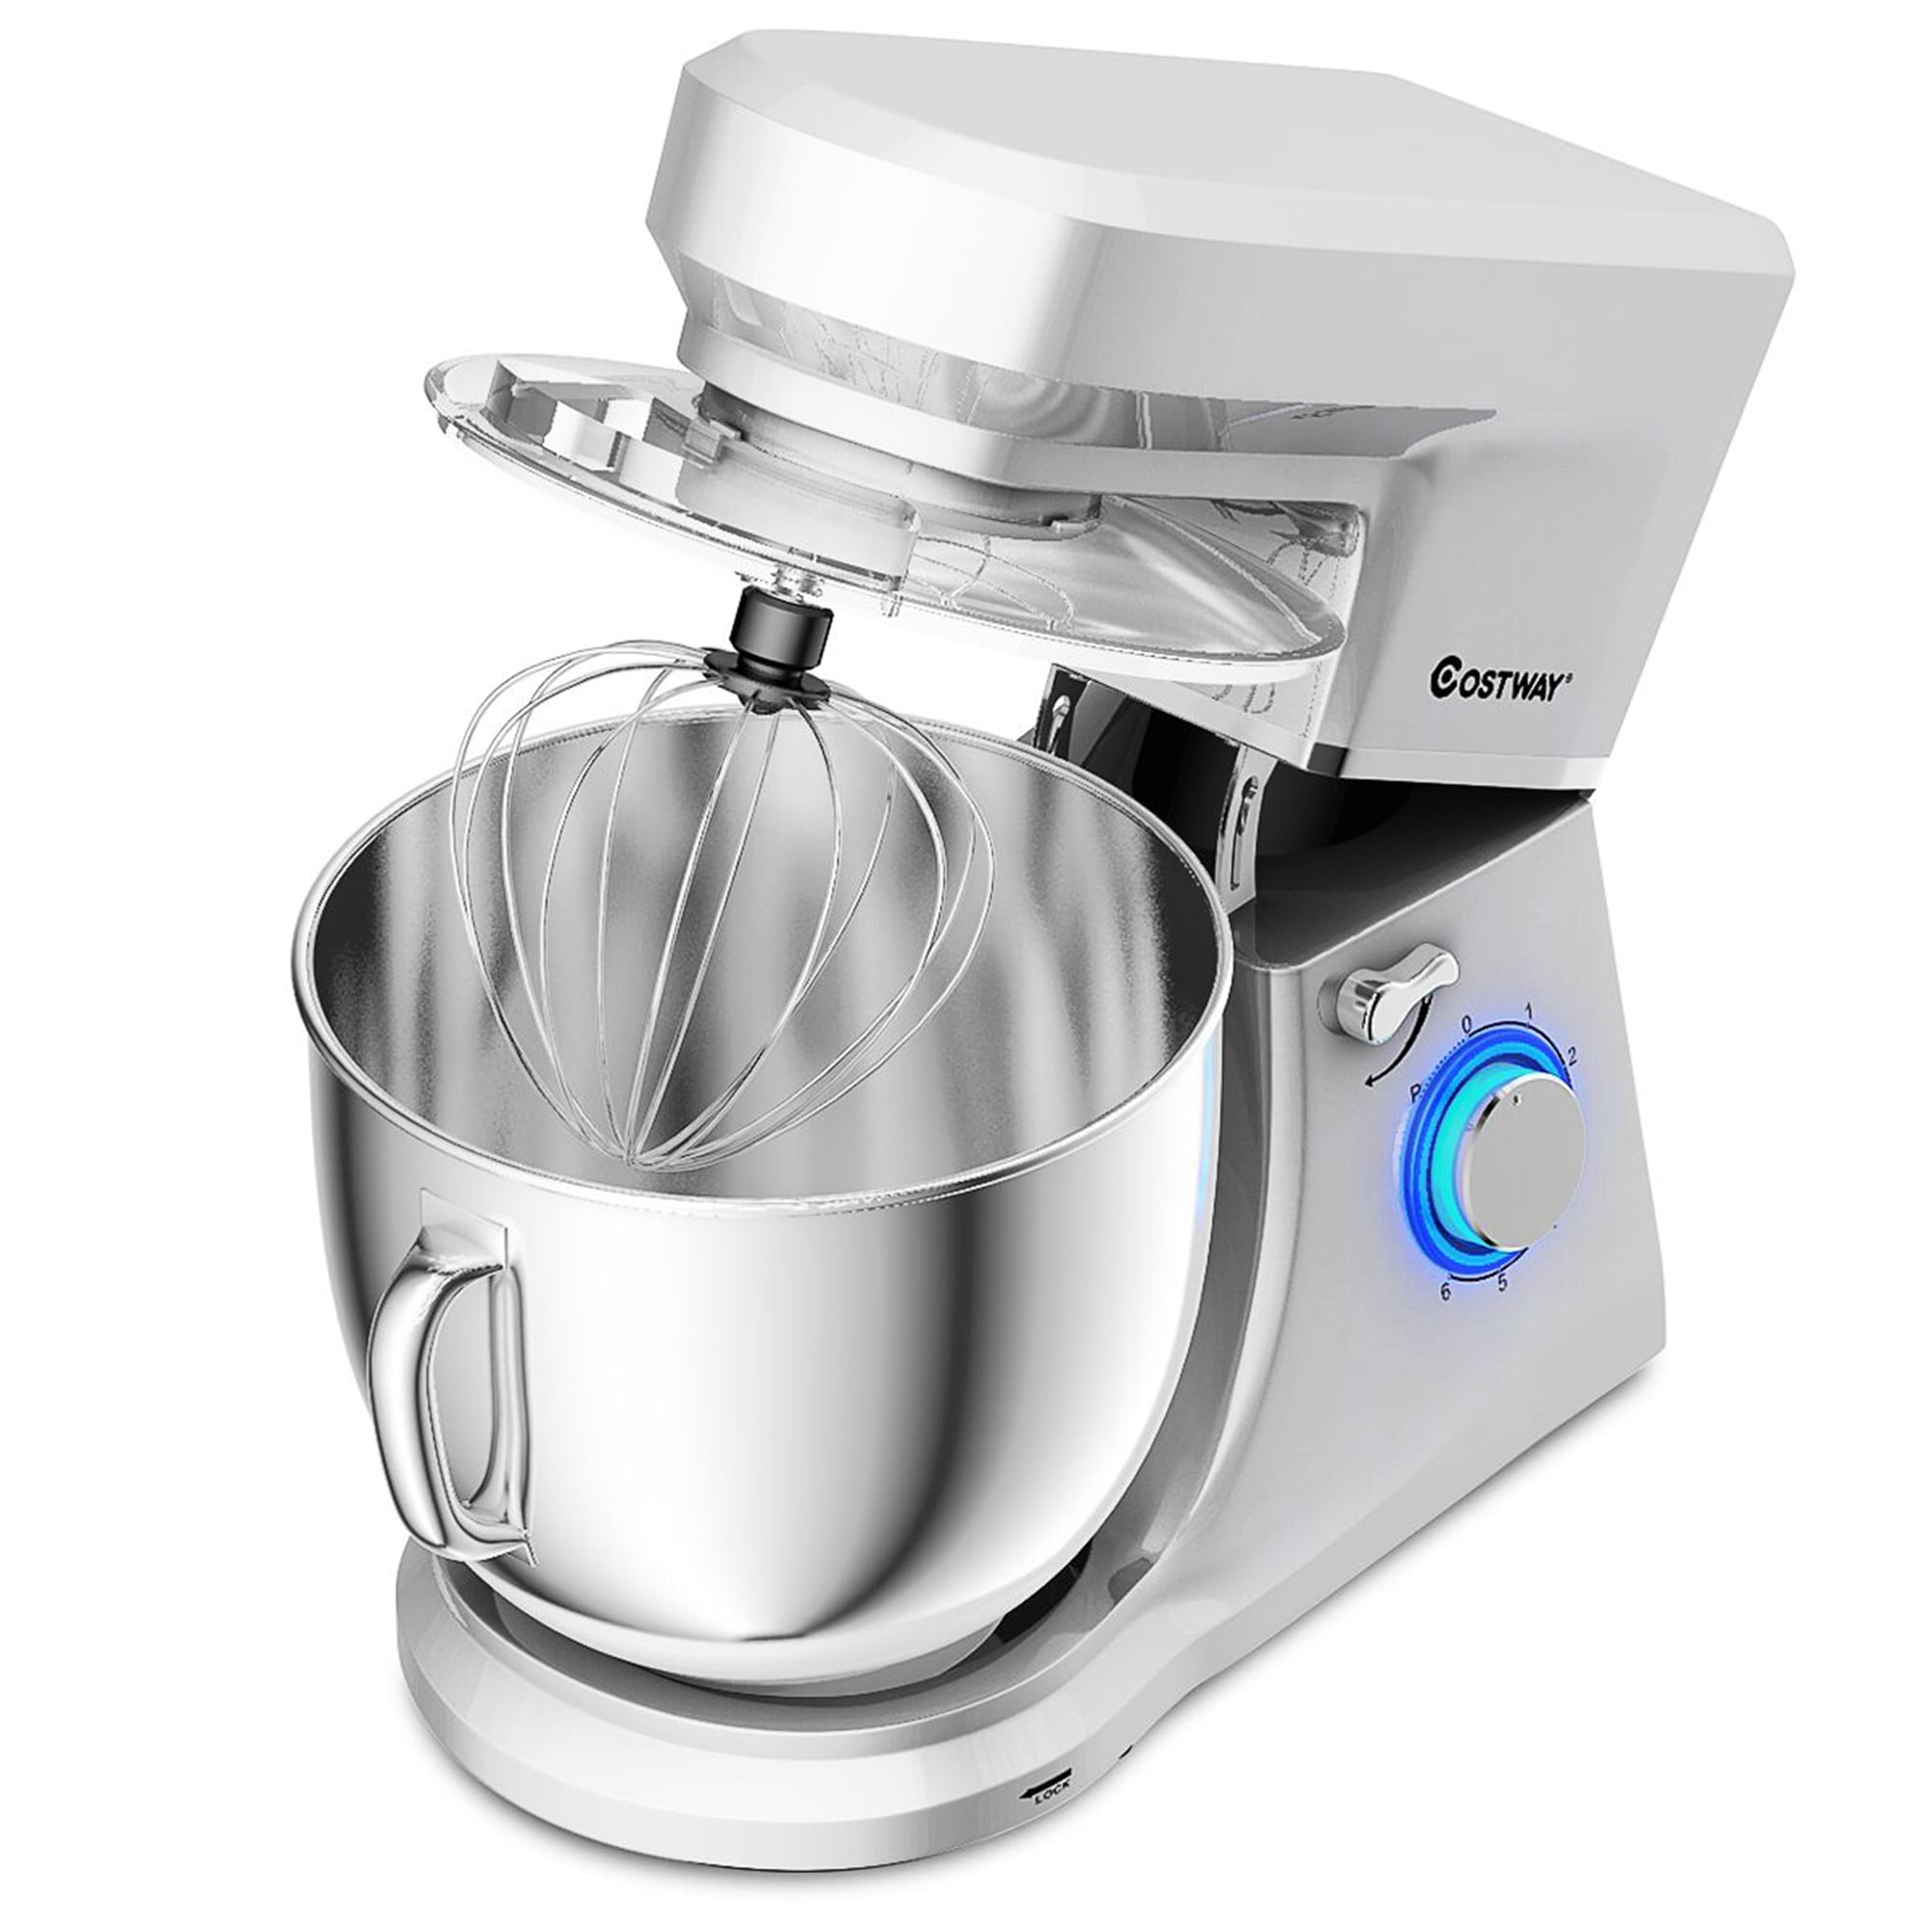 Whall Kinfai Electric Kitchen Stand Mixer Machine with 4.5 Quart